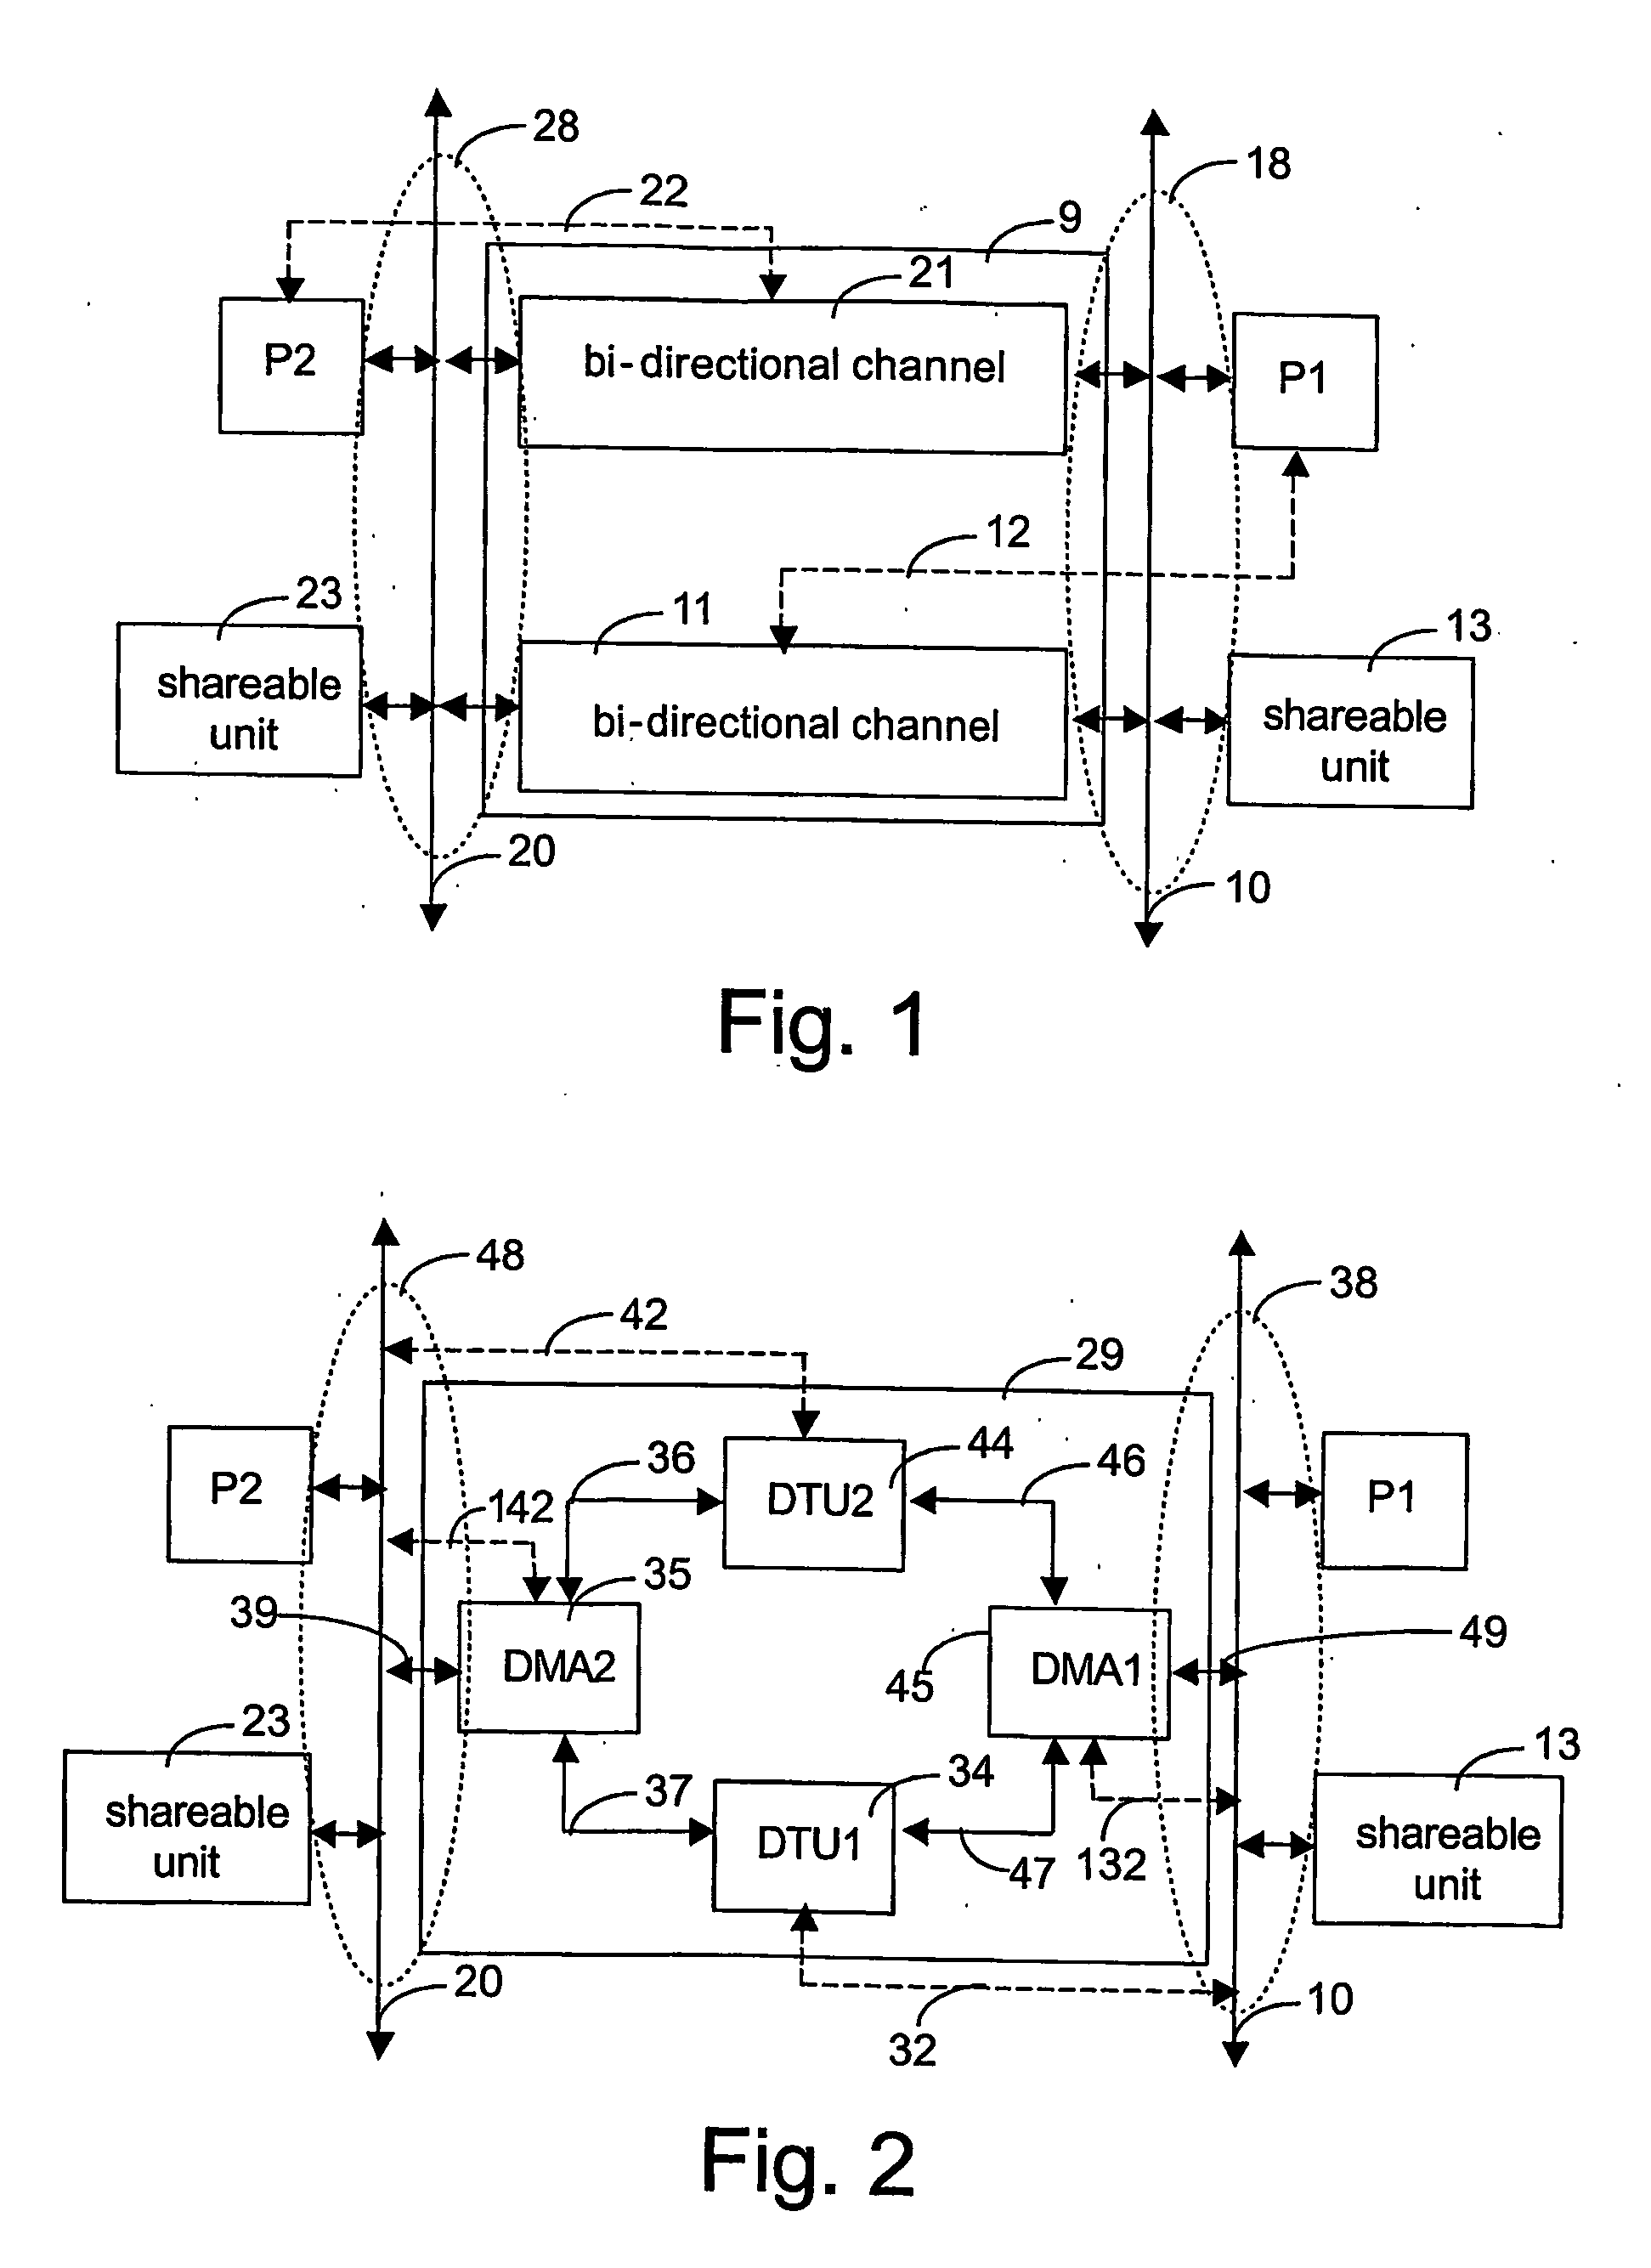 Inter-processor communication system for communication between processors